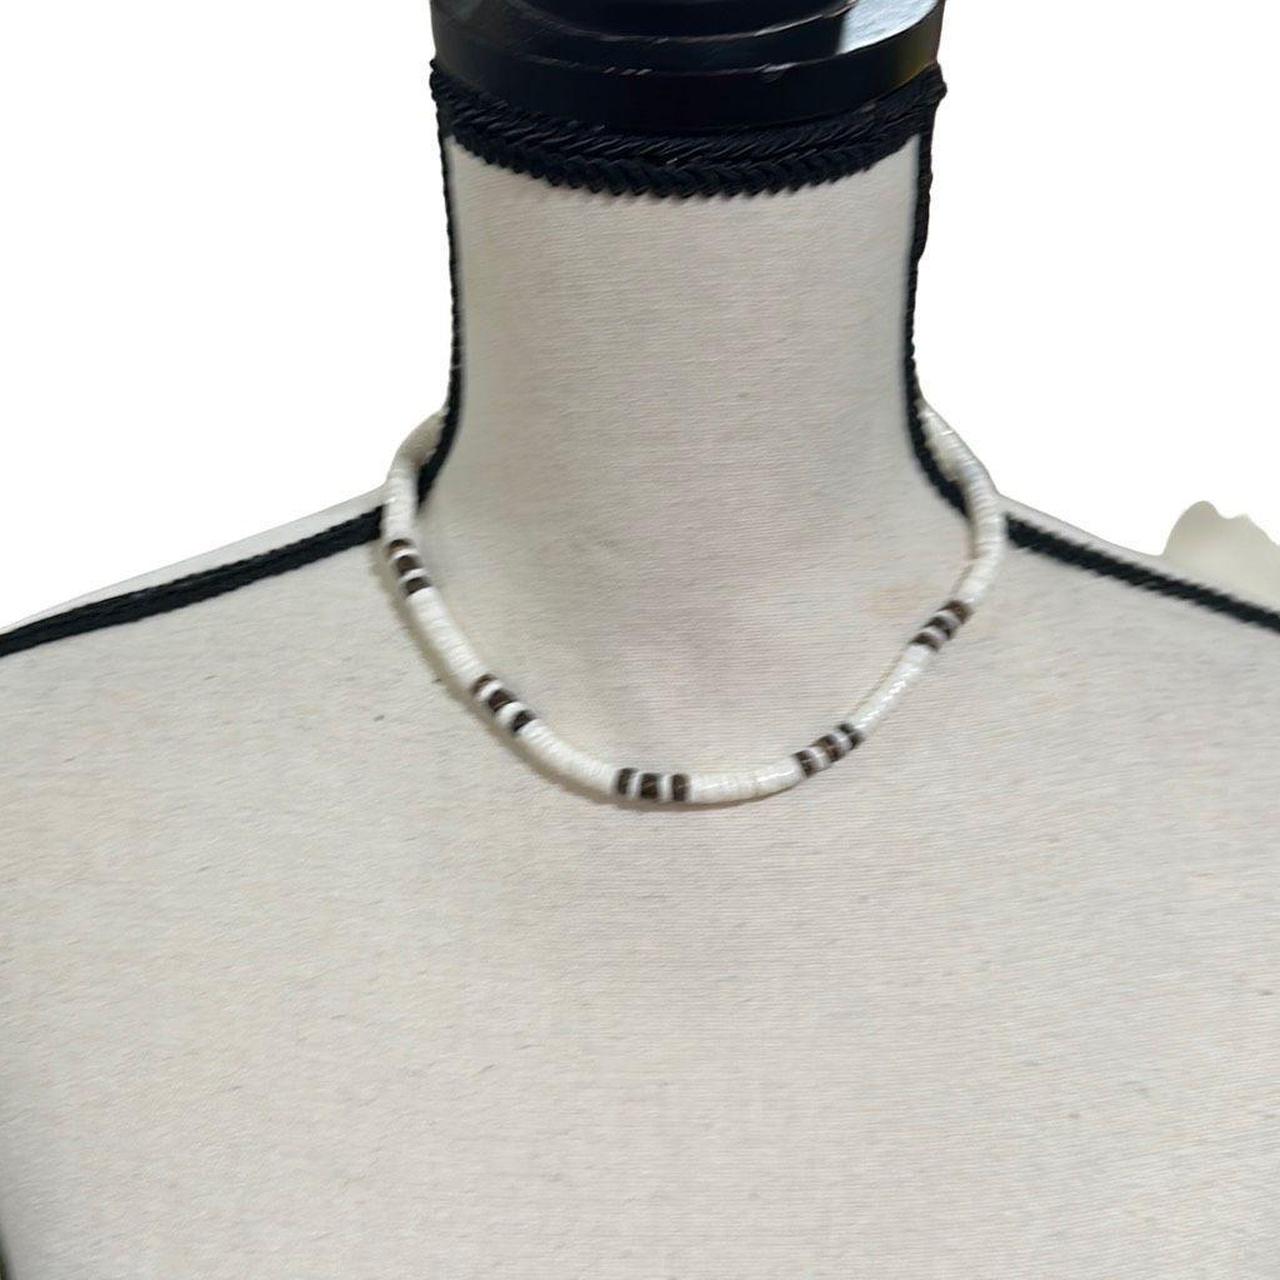 Extra Wide Men's Necklace, White Puka Shell, Black Coconut 8mm Wide Surf  Necklace for Man BD8_02 - Etsy